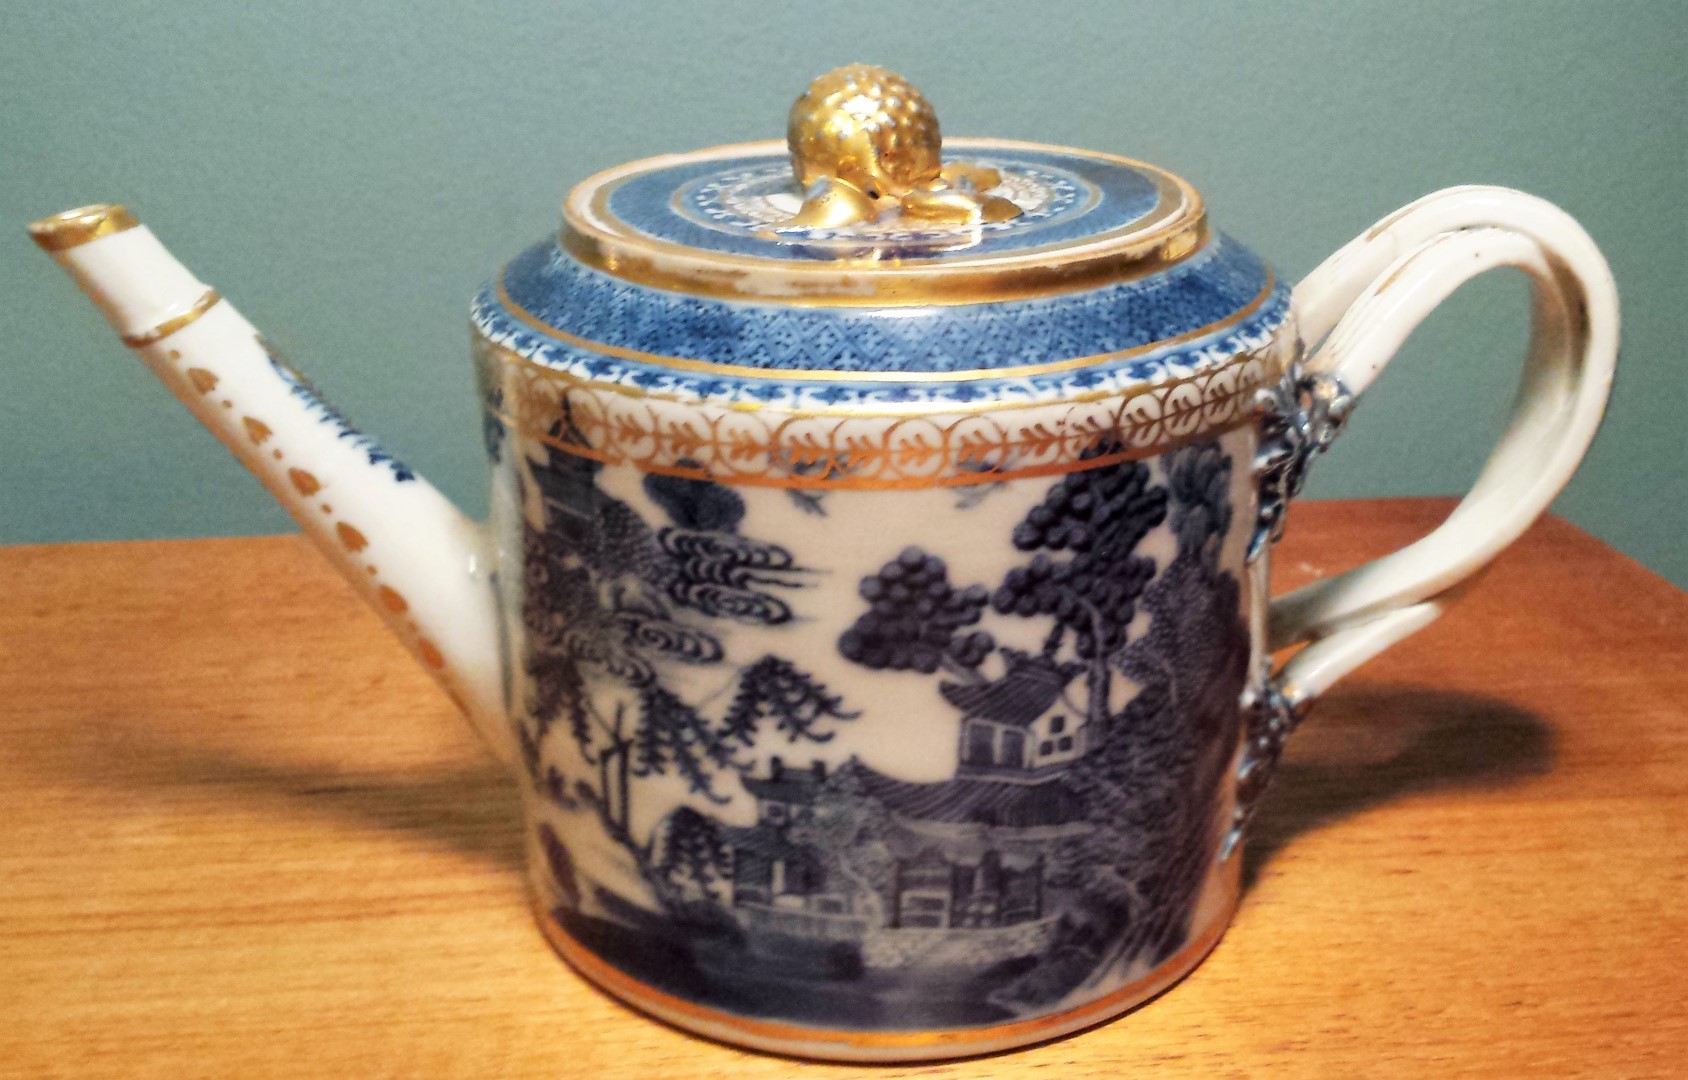 Qing dynasty teapot hand painted in cobalt blue. Nanking porcelain